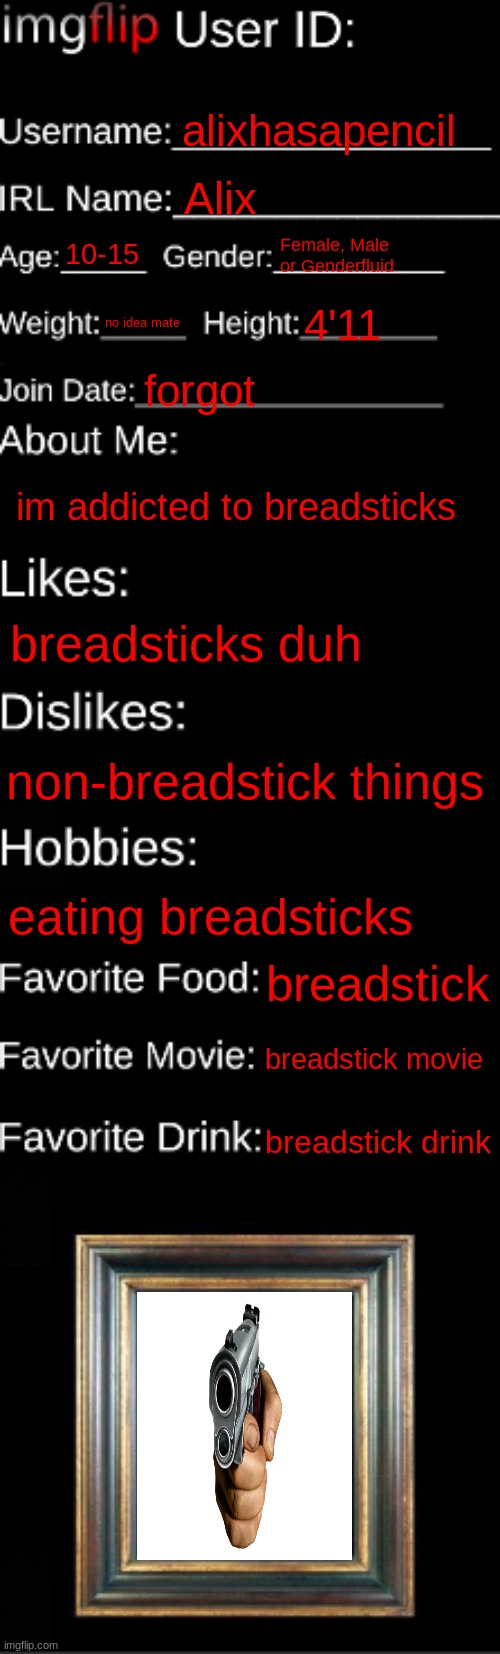 imgflip ID Card | alixhasapencil; Alix; 10-15; Female, Male or Genderfluid; no idea mate; 4'11; forgot; im addicted to breadsticks; breadsticks duh; non-breadstick things; eating breadsticks; breadstick; breadstick movie; breadstick drink | image tagged in imgflip id card | made w/ Imgflip meme maker